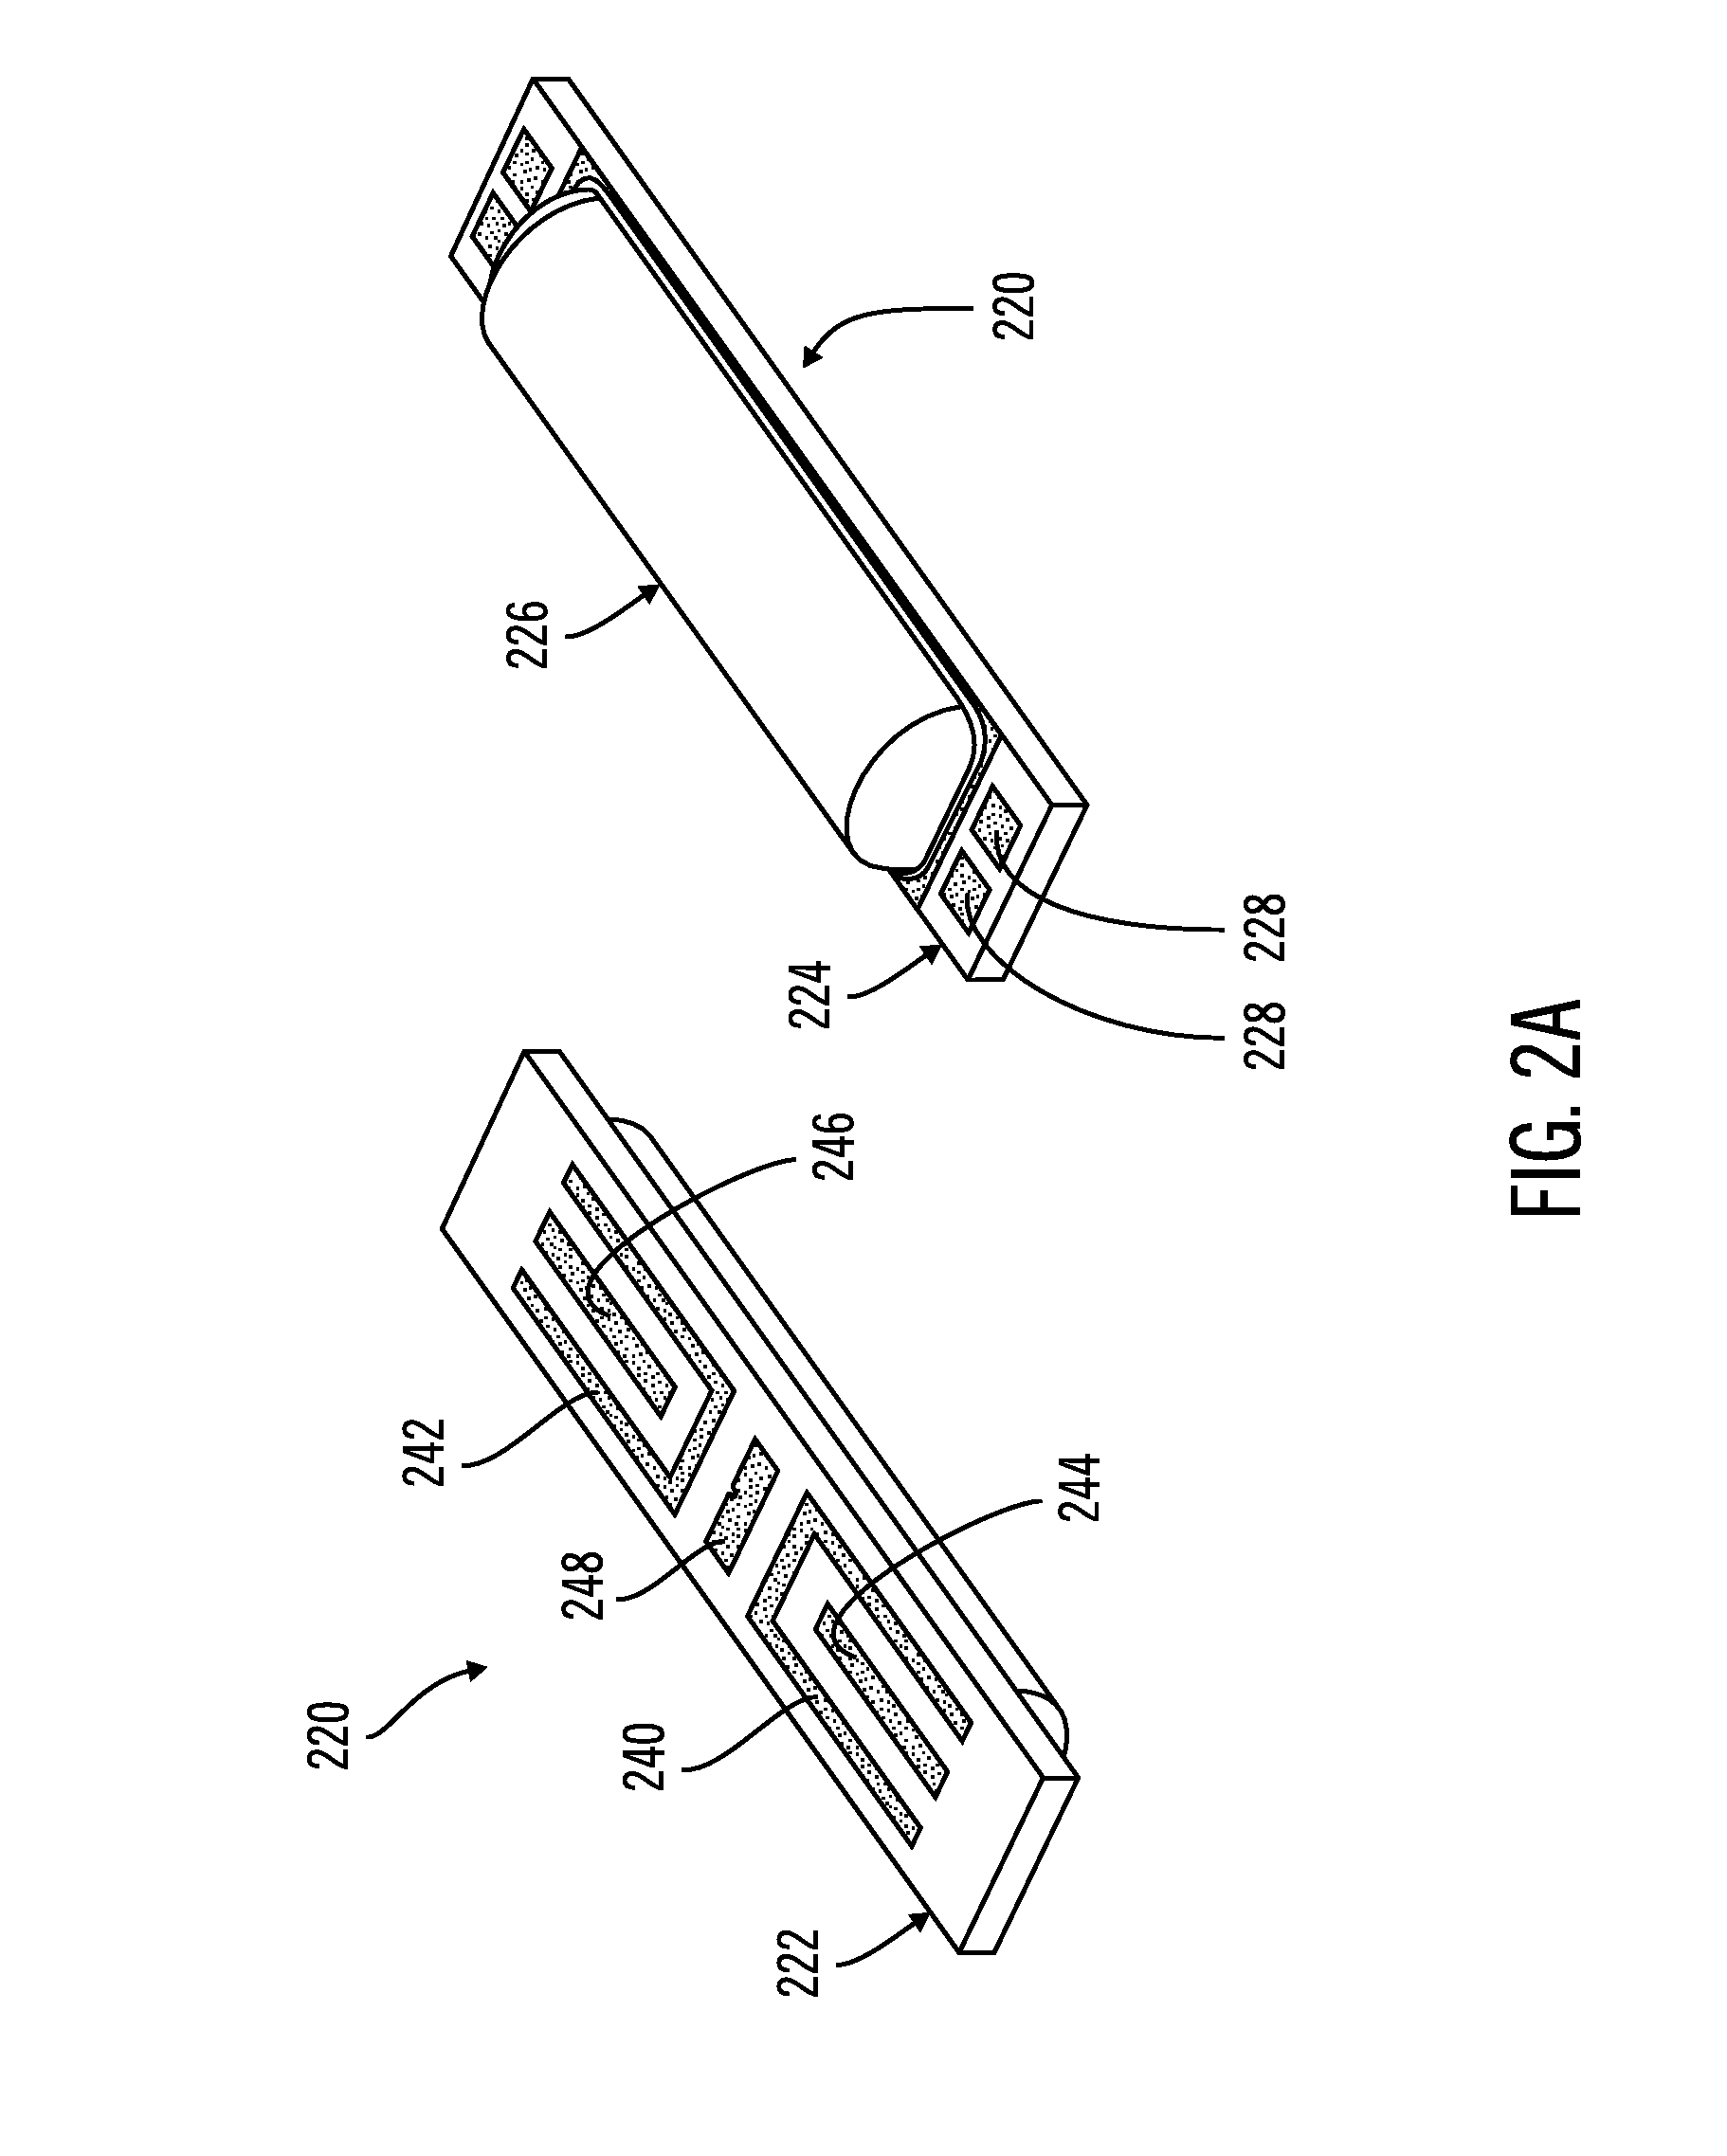 System and method for determining the point of hydration and proper time to apply potential to a glucose sensor